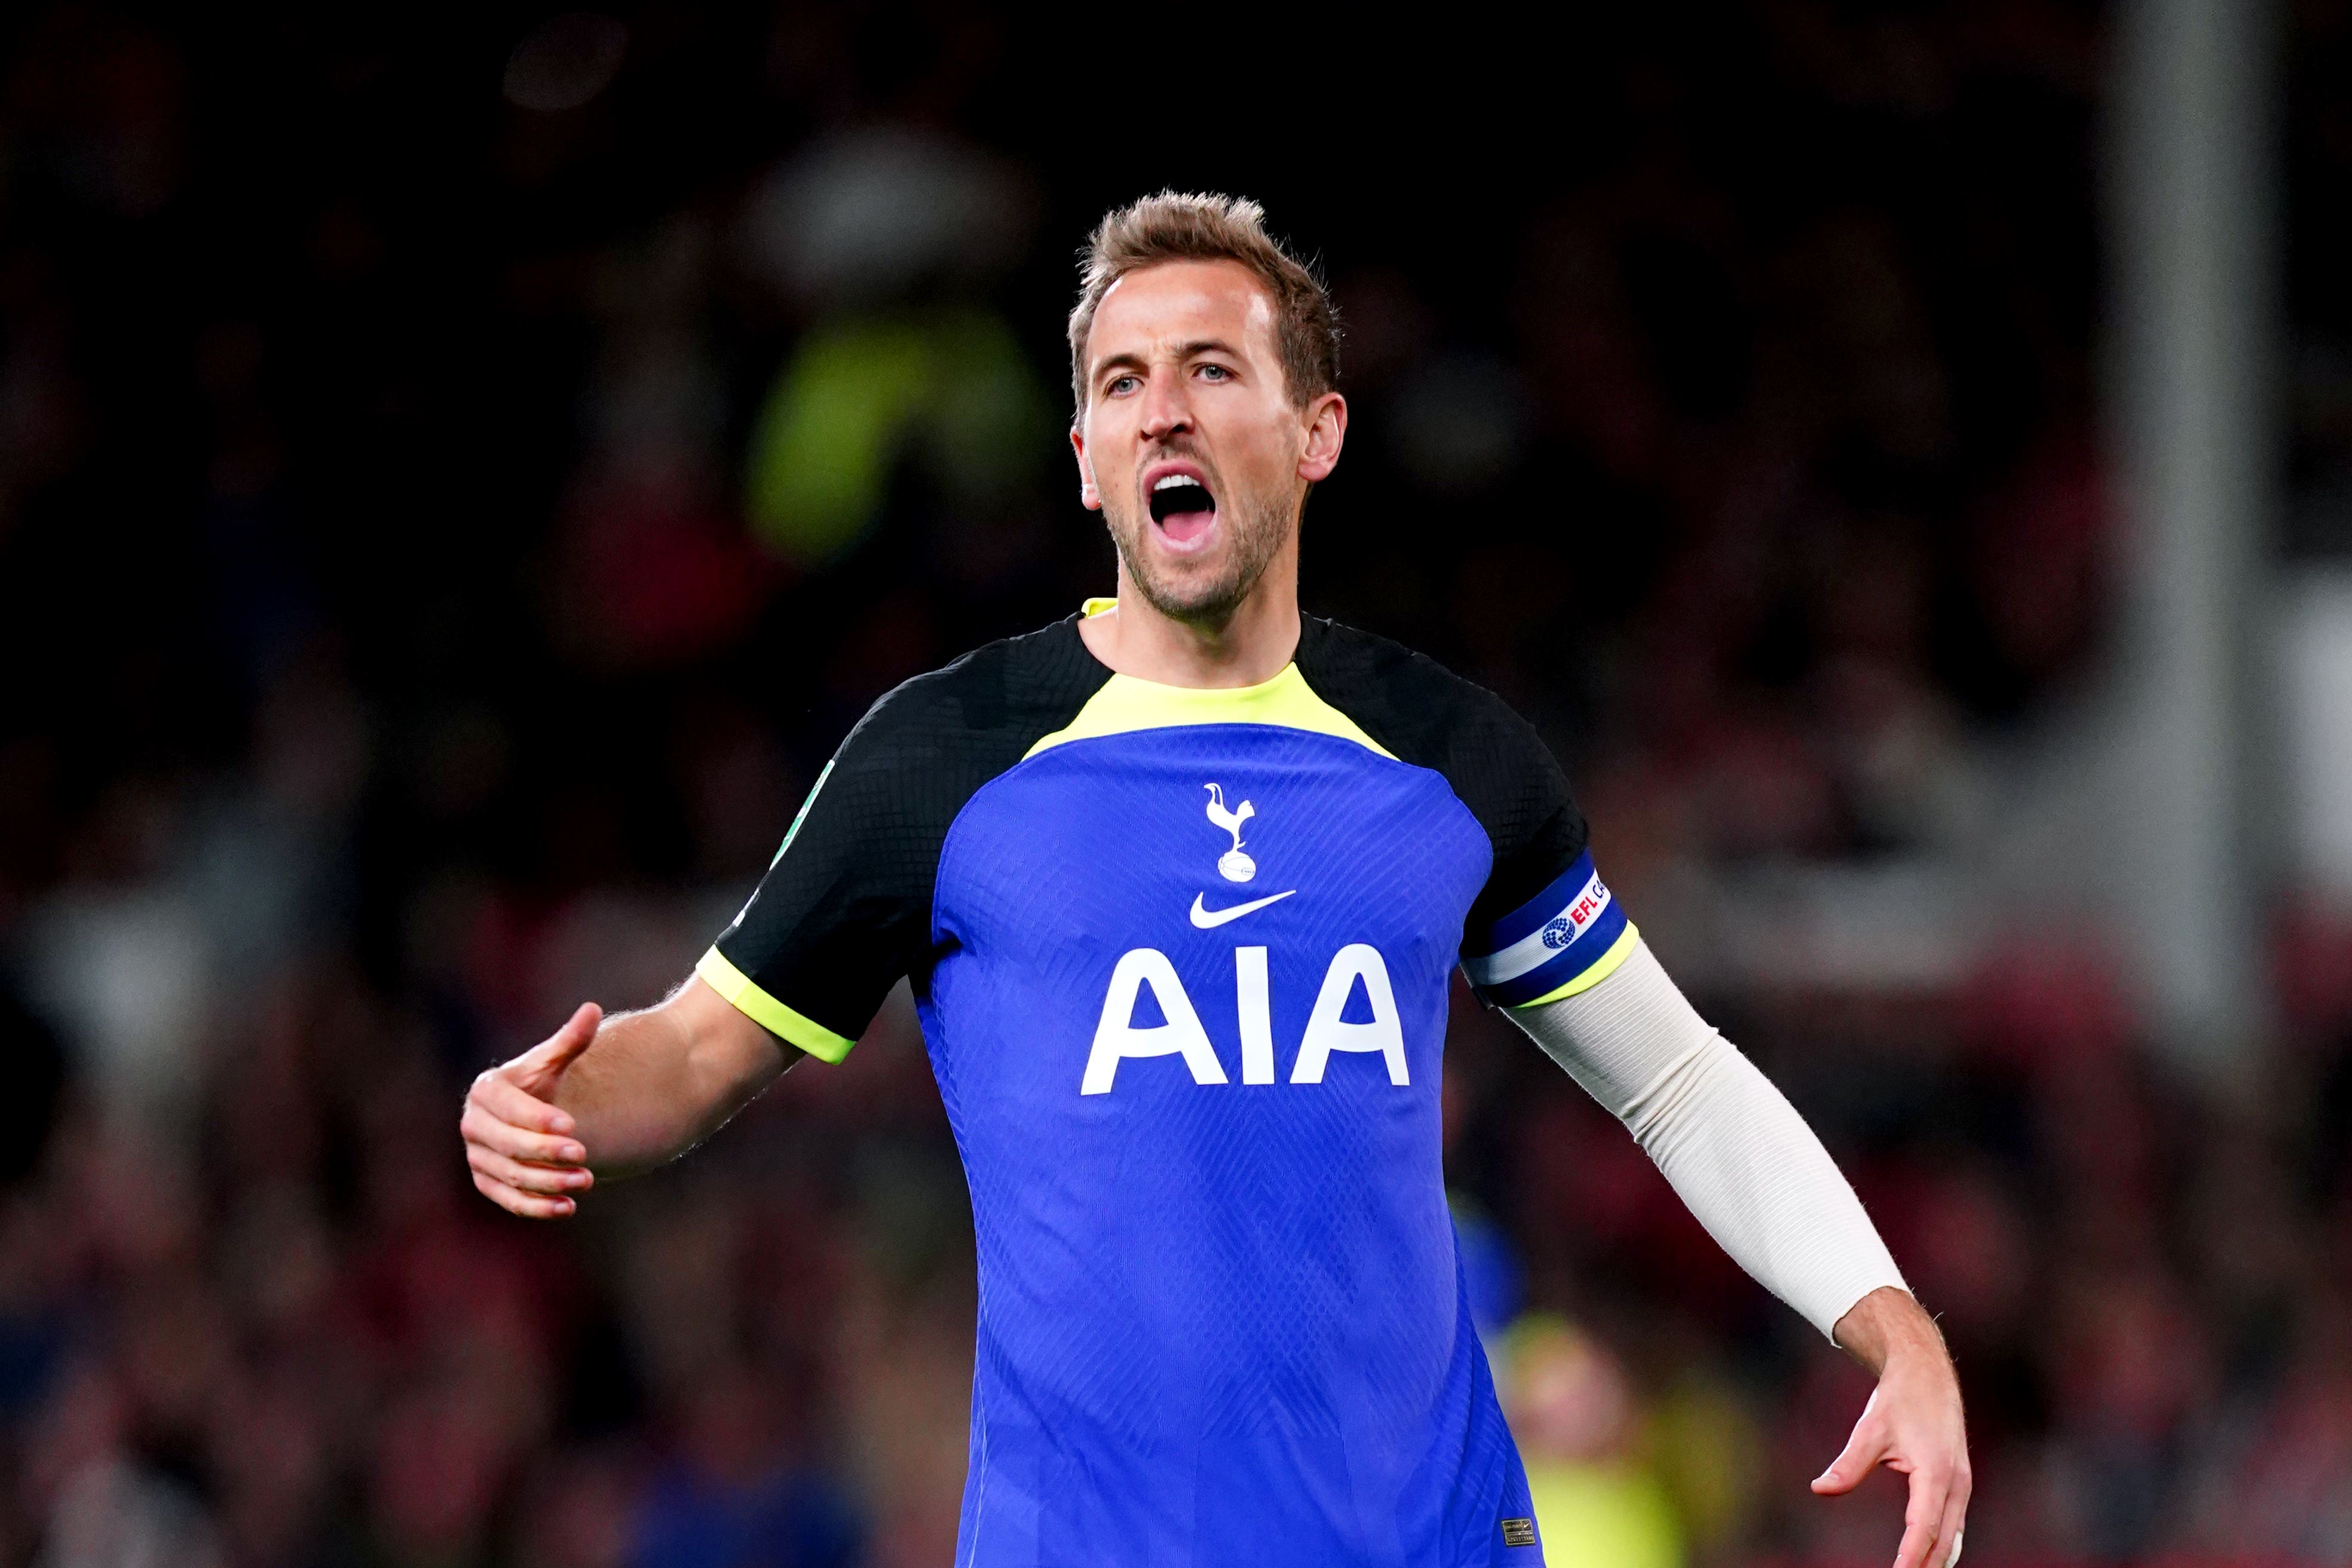 Tottenham Hotspur’s Harry Kane during the Carabao Cup third round match at the City Ground, Nottingham. Picture date: Wednesday November 9, 2022.